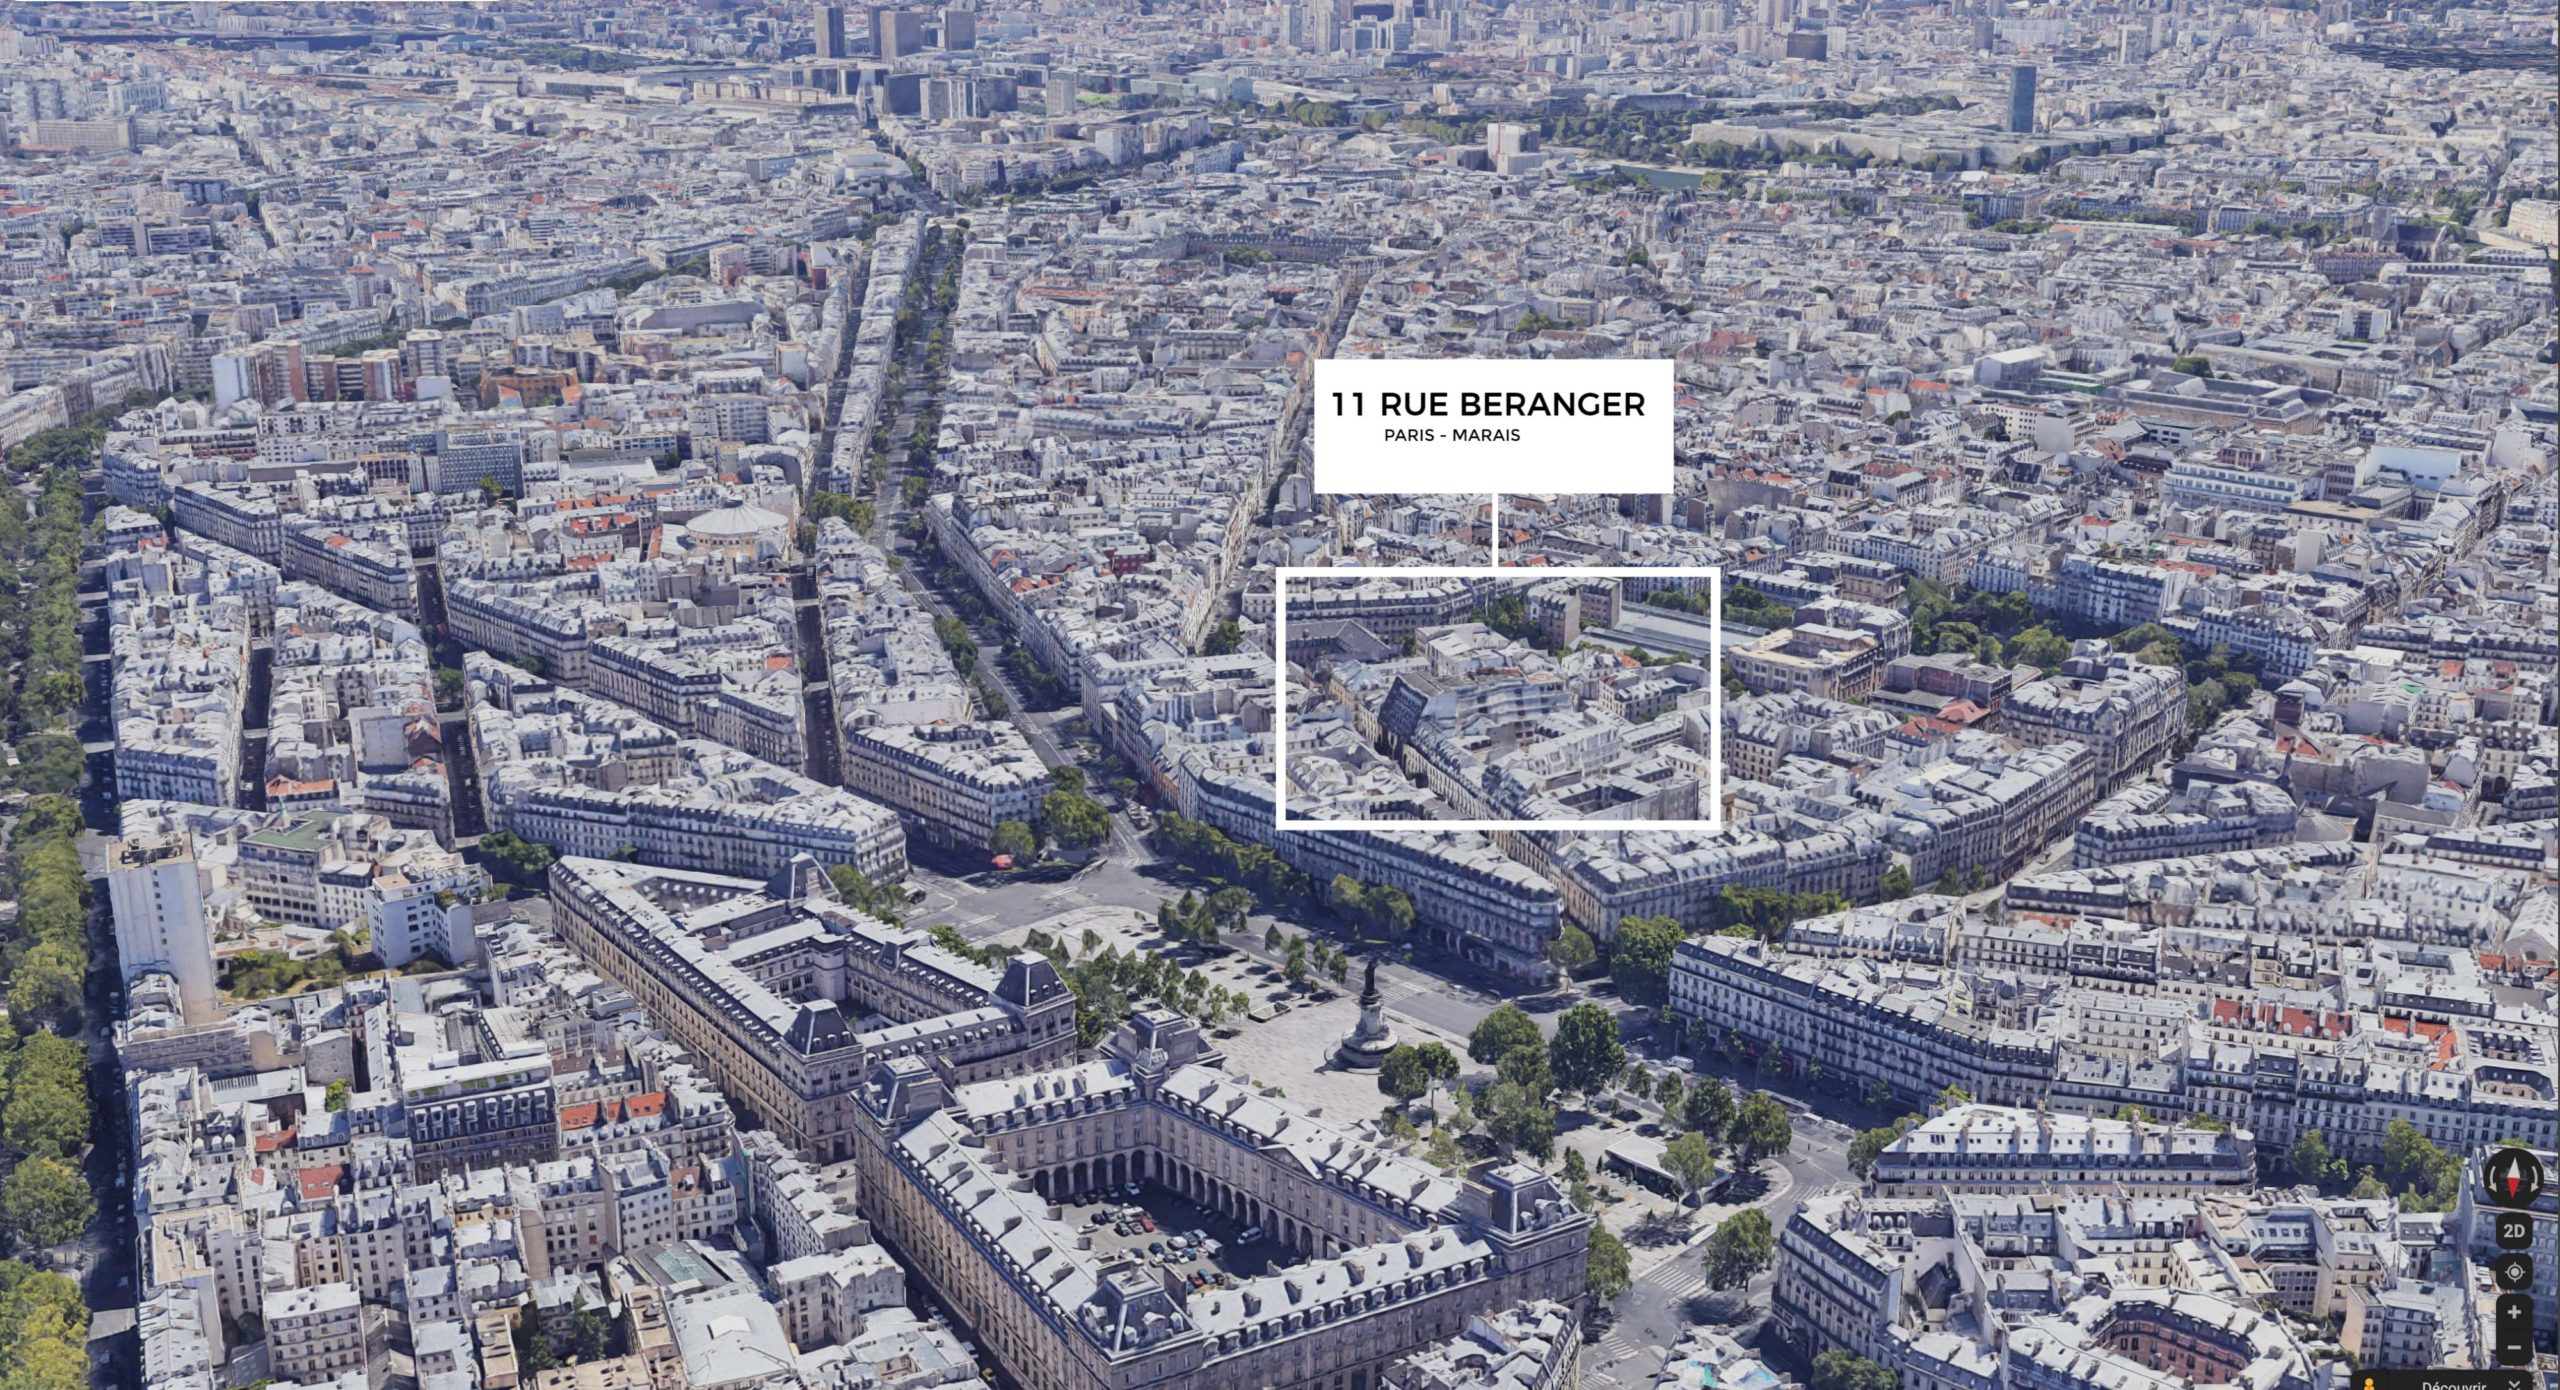 ASSEMBLY will develop for MARK’s Paris Urban Regeneration Fund the former HQ of French national newspaper Libération